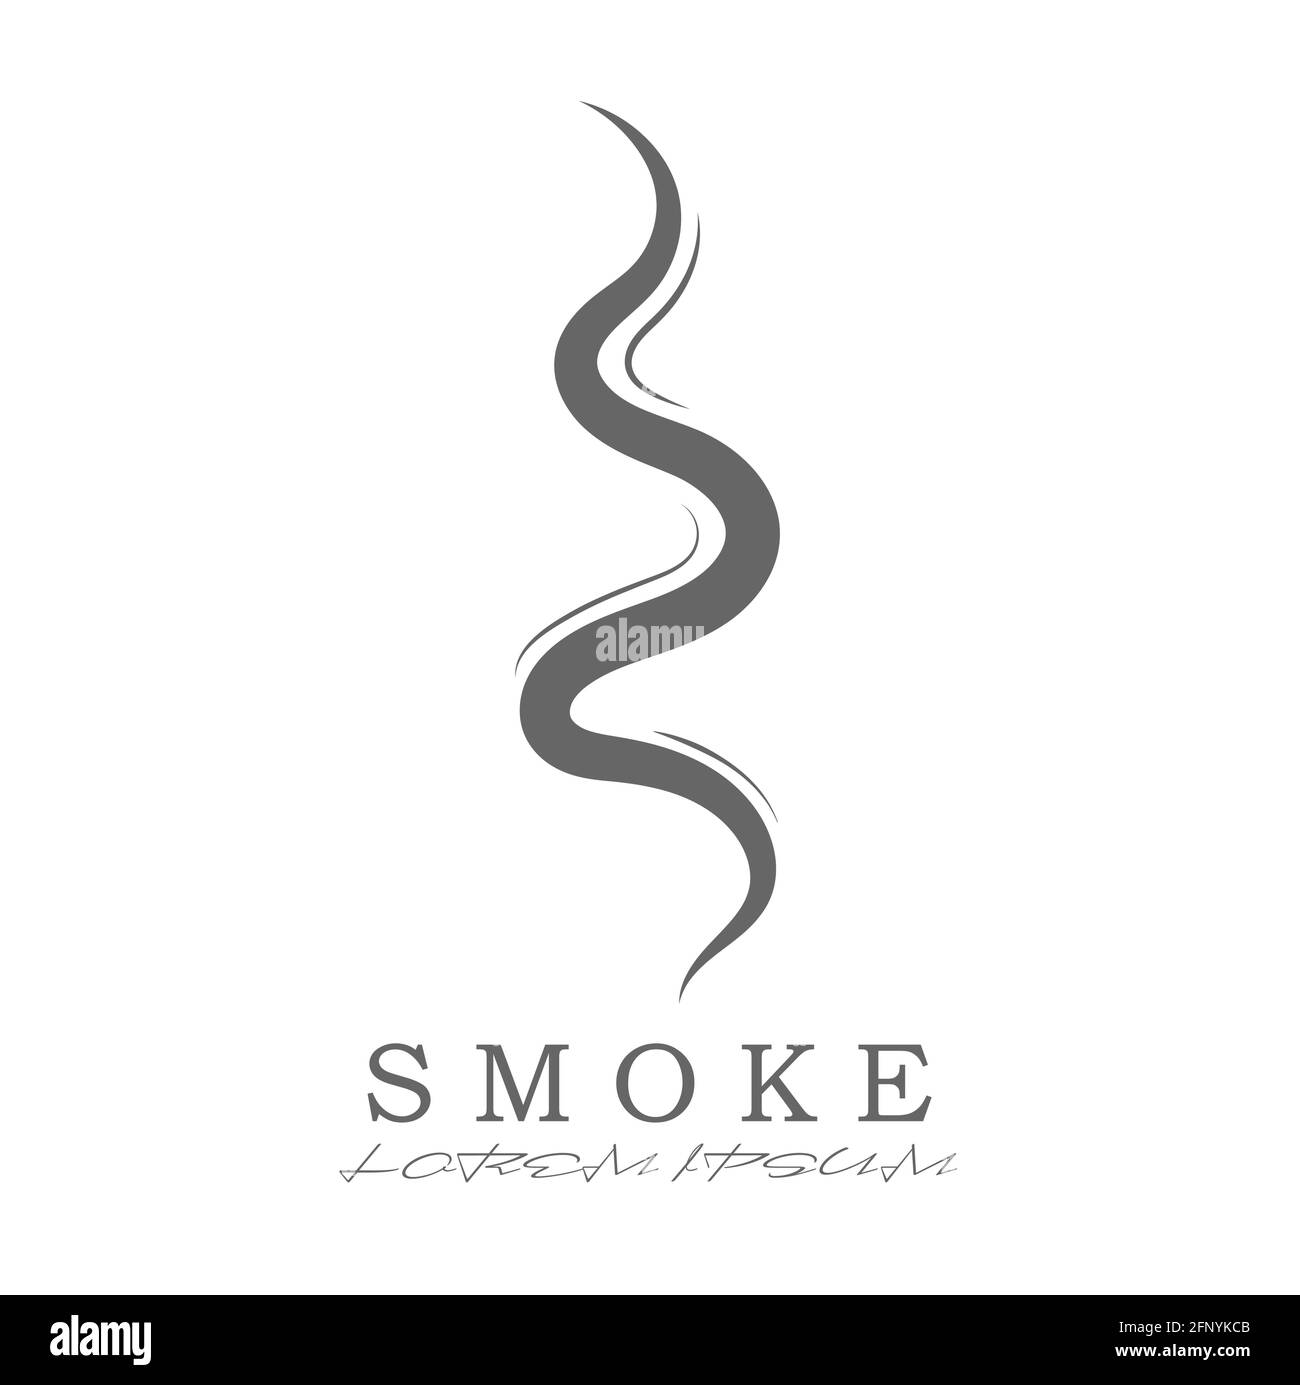 Vector icon of smoke, incense, or steam. Flat style, isolated on a white background. Stock Vector